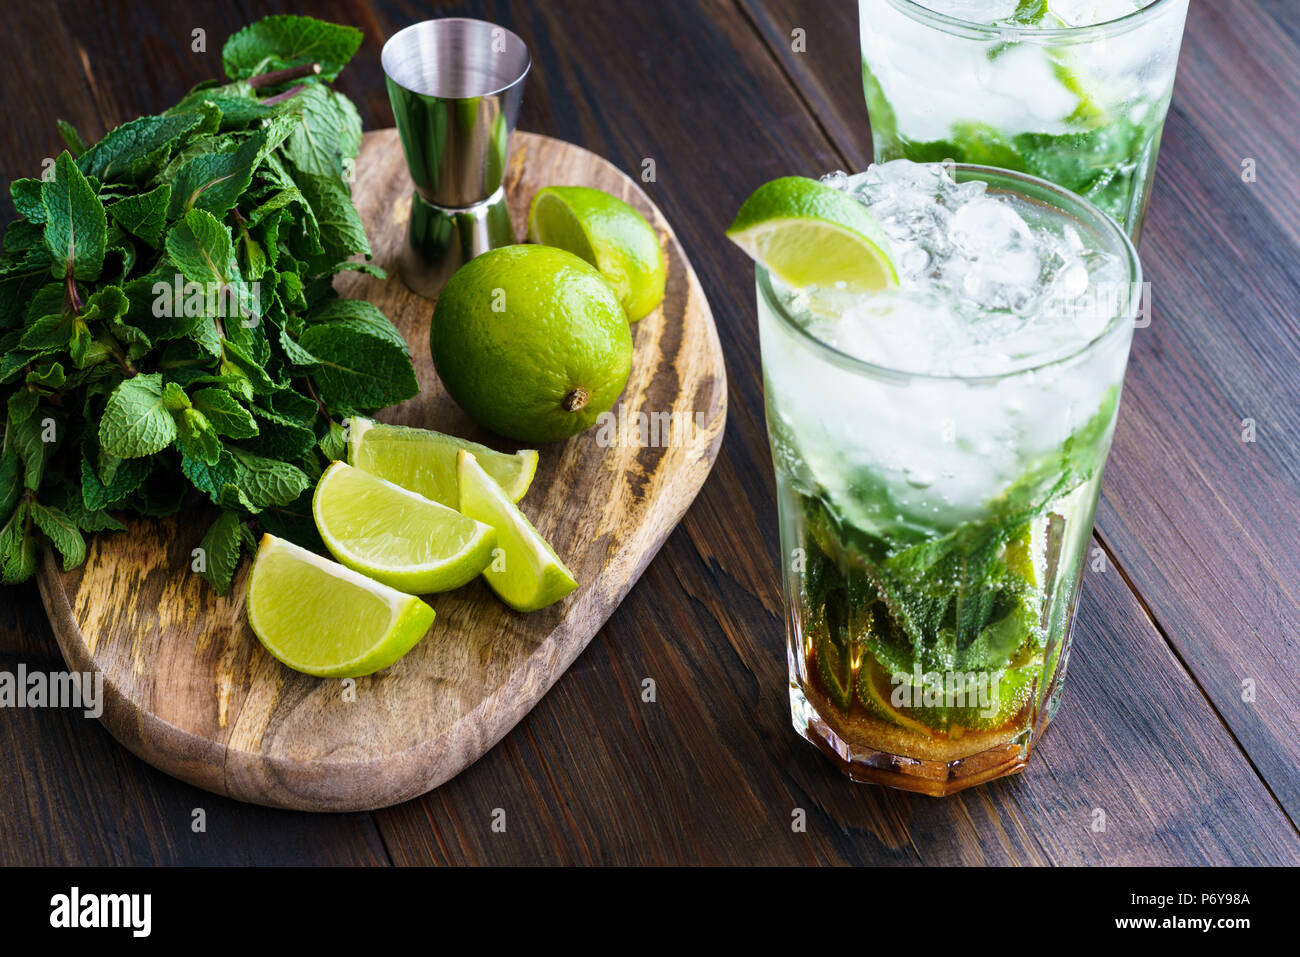 Dirty mojito and ingredients (fresh mint, sliced lime) served on a dark wooden board. High resolution. Stock Photo